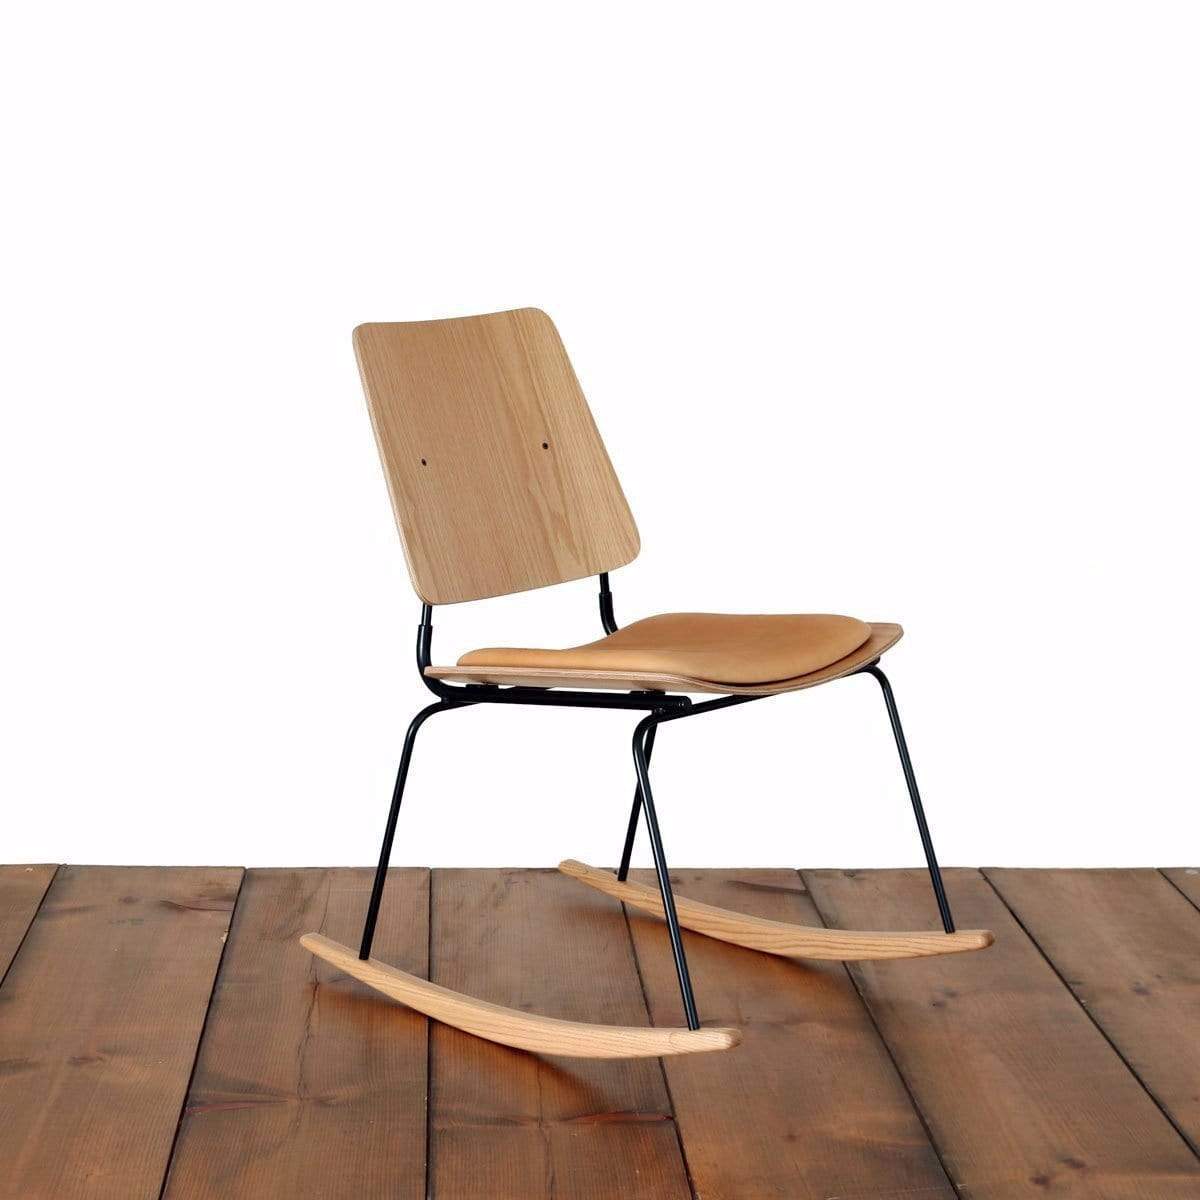 A bent plywood rocking chair with no arms